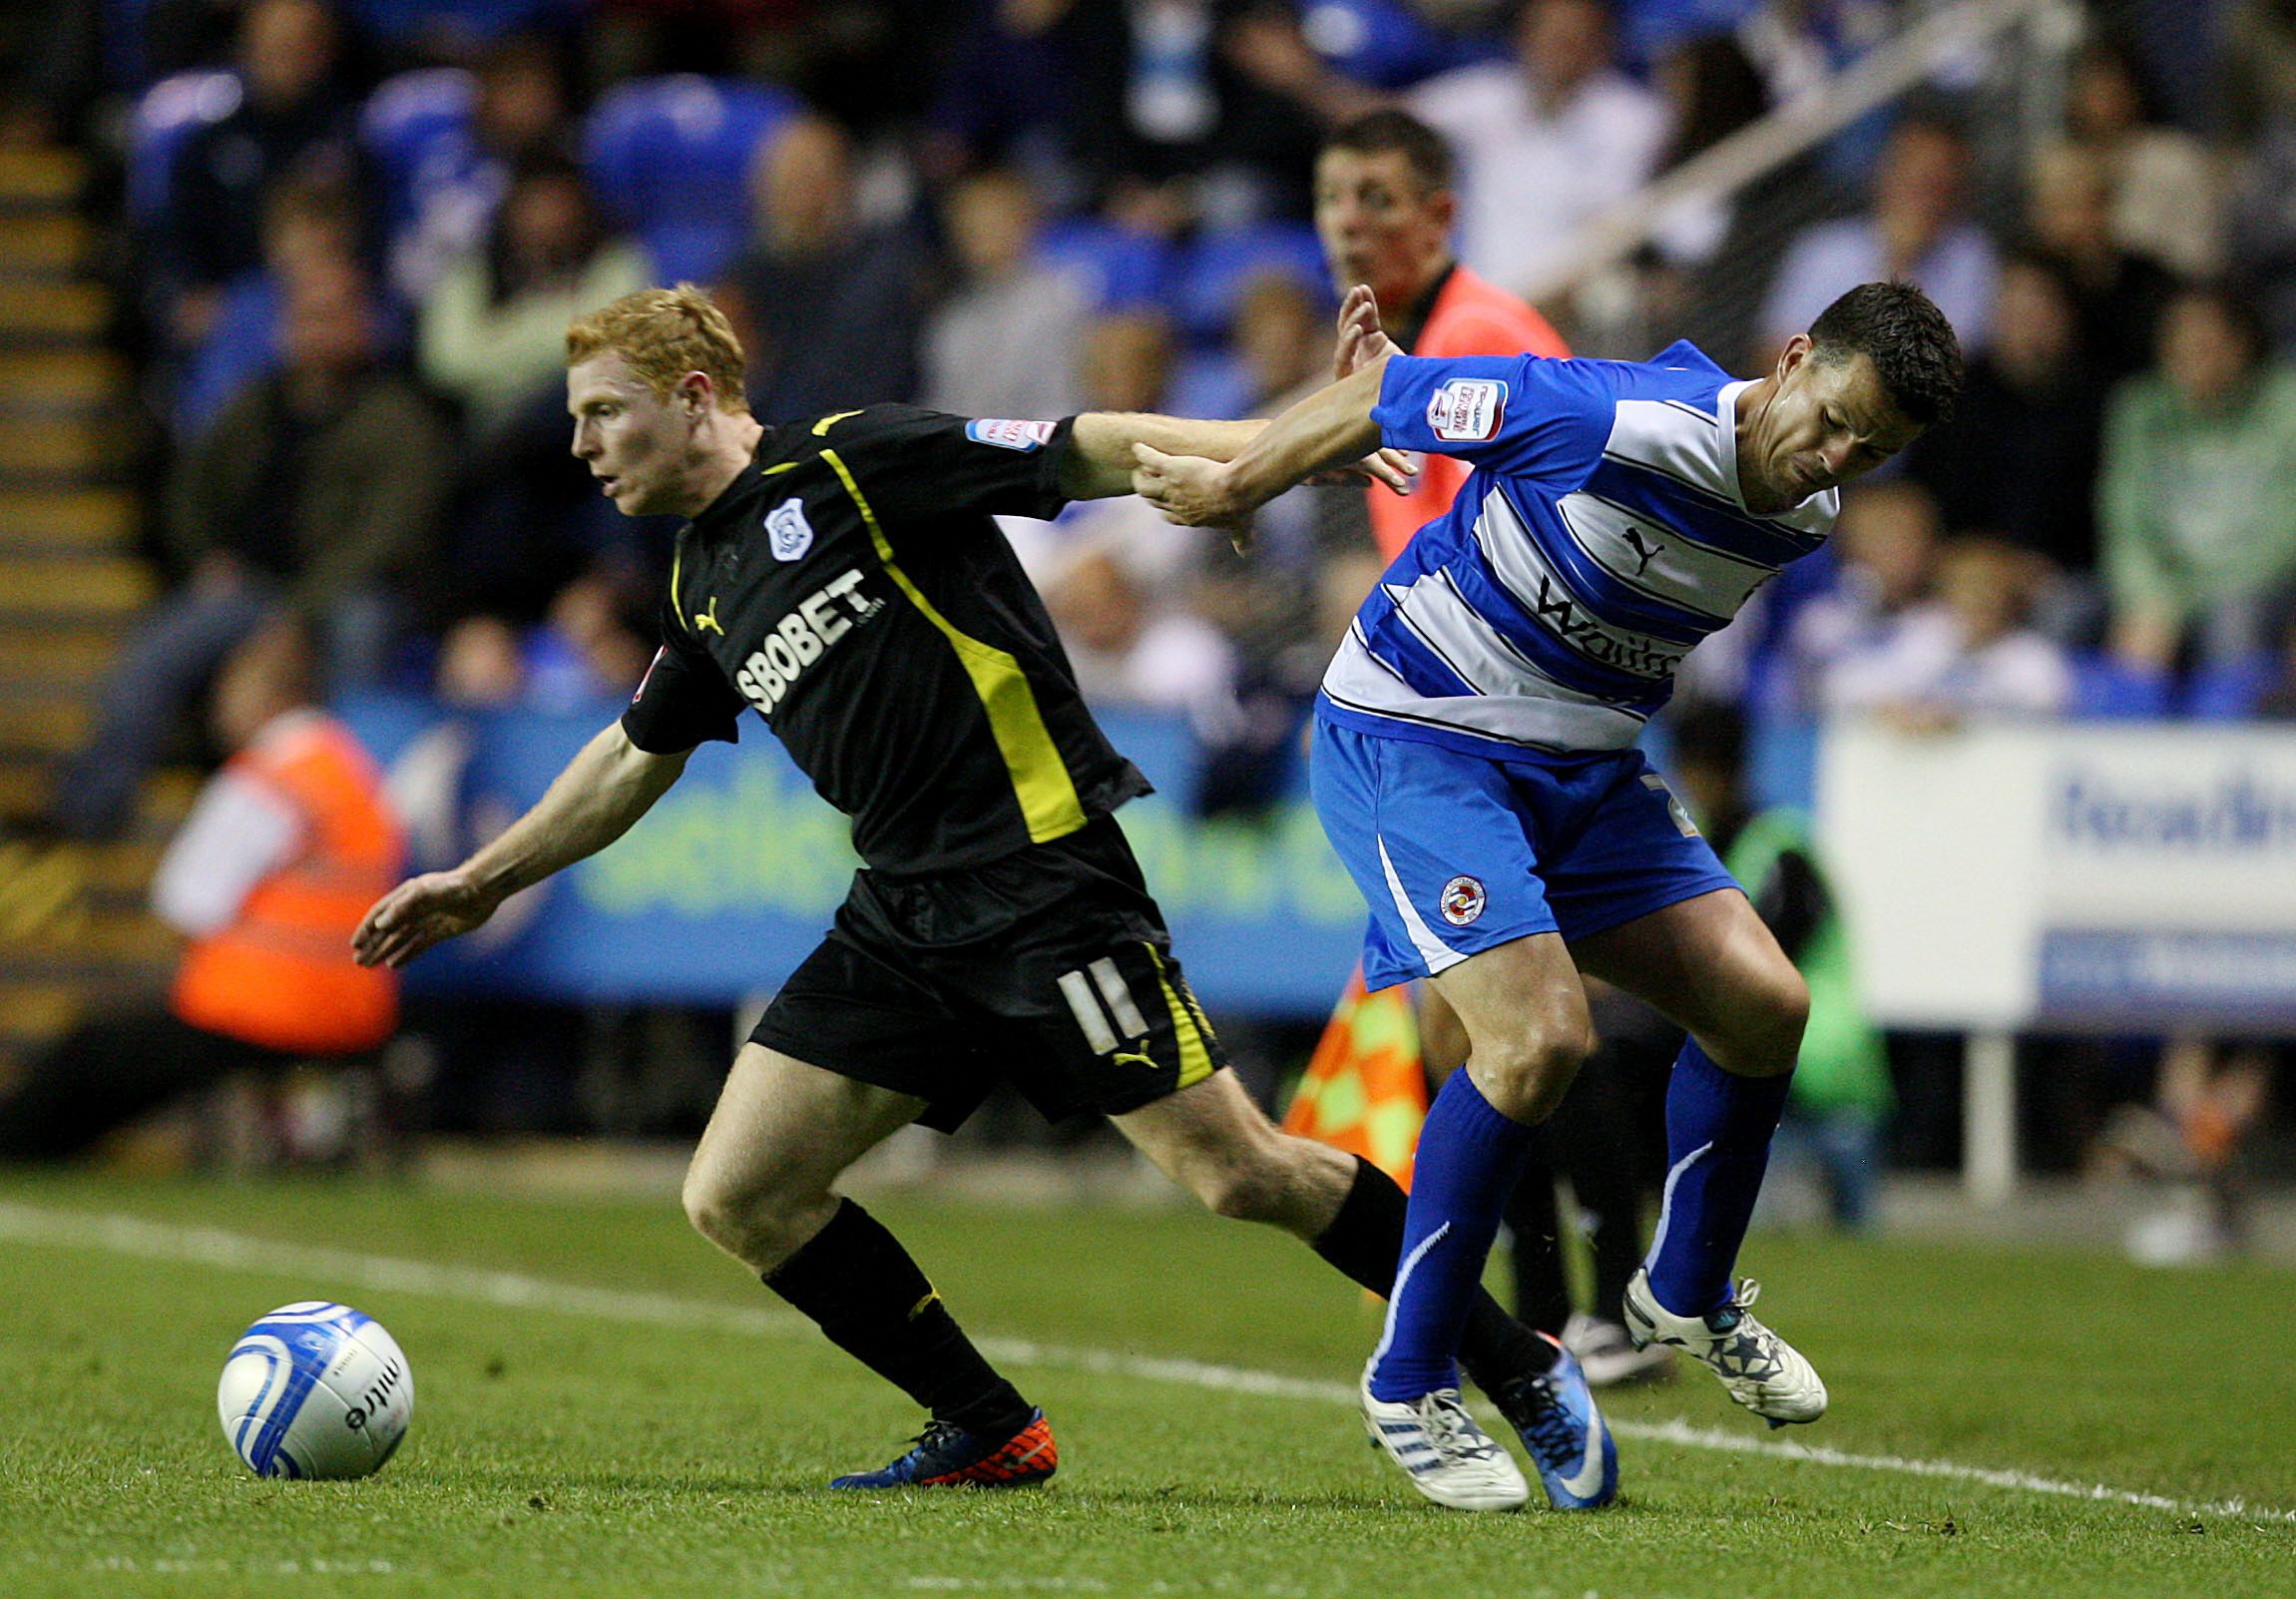 Football - Reading v Cardiff City npower Football League Championship Play-Off Semi Final First Leg  - The Madejski Stadium - 10/11 - 13/5/11 
Cardiff City's Chris Burke (L) and Reading's Grzegorz Rasiak in action 
Mandatory Credit: Action Images / Steven Paston 
Livepic